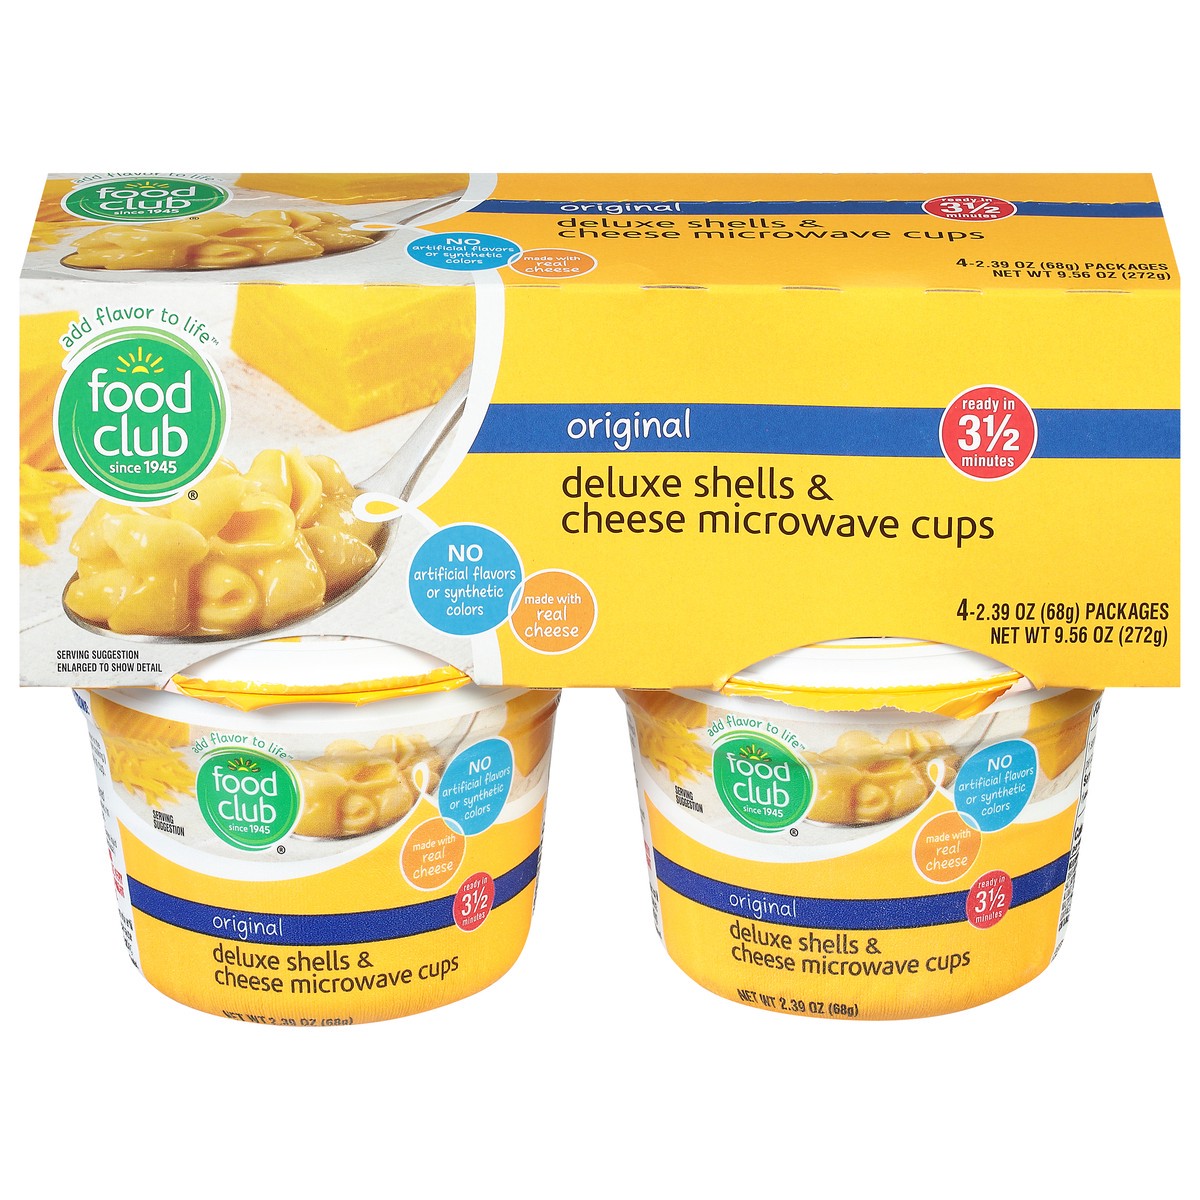 slide 11 of 11, Food Club Original Deluxe Shells & Cheese Microwave Cups, 9.56 oz